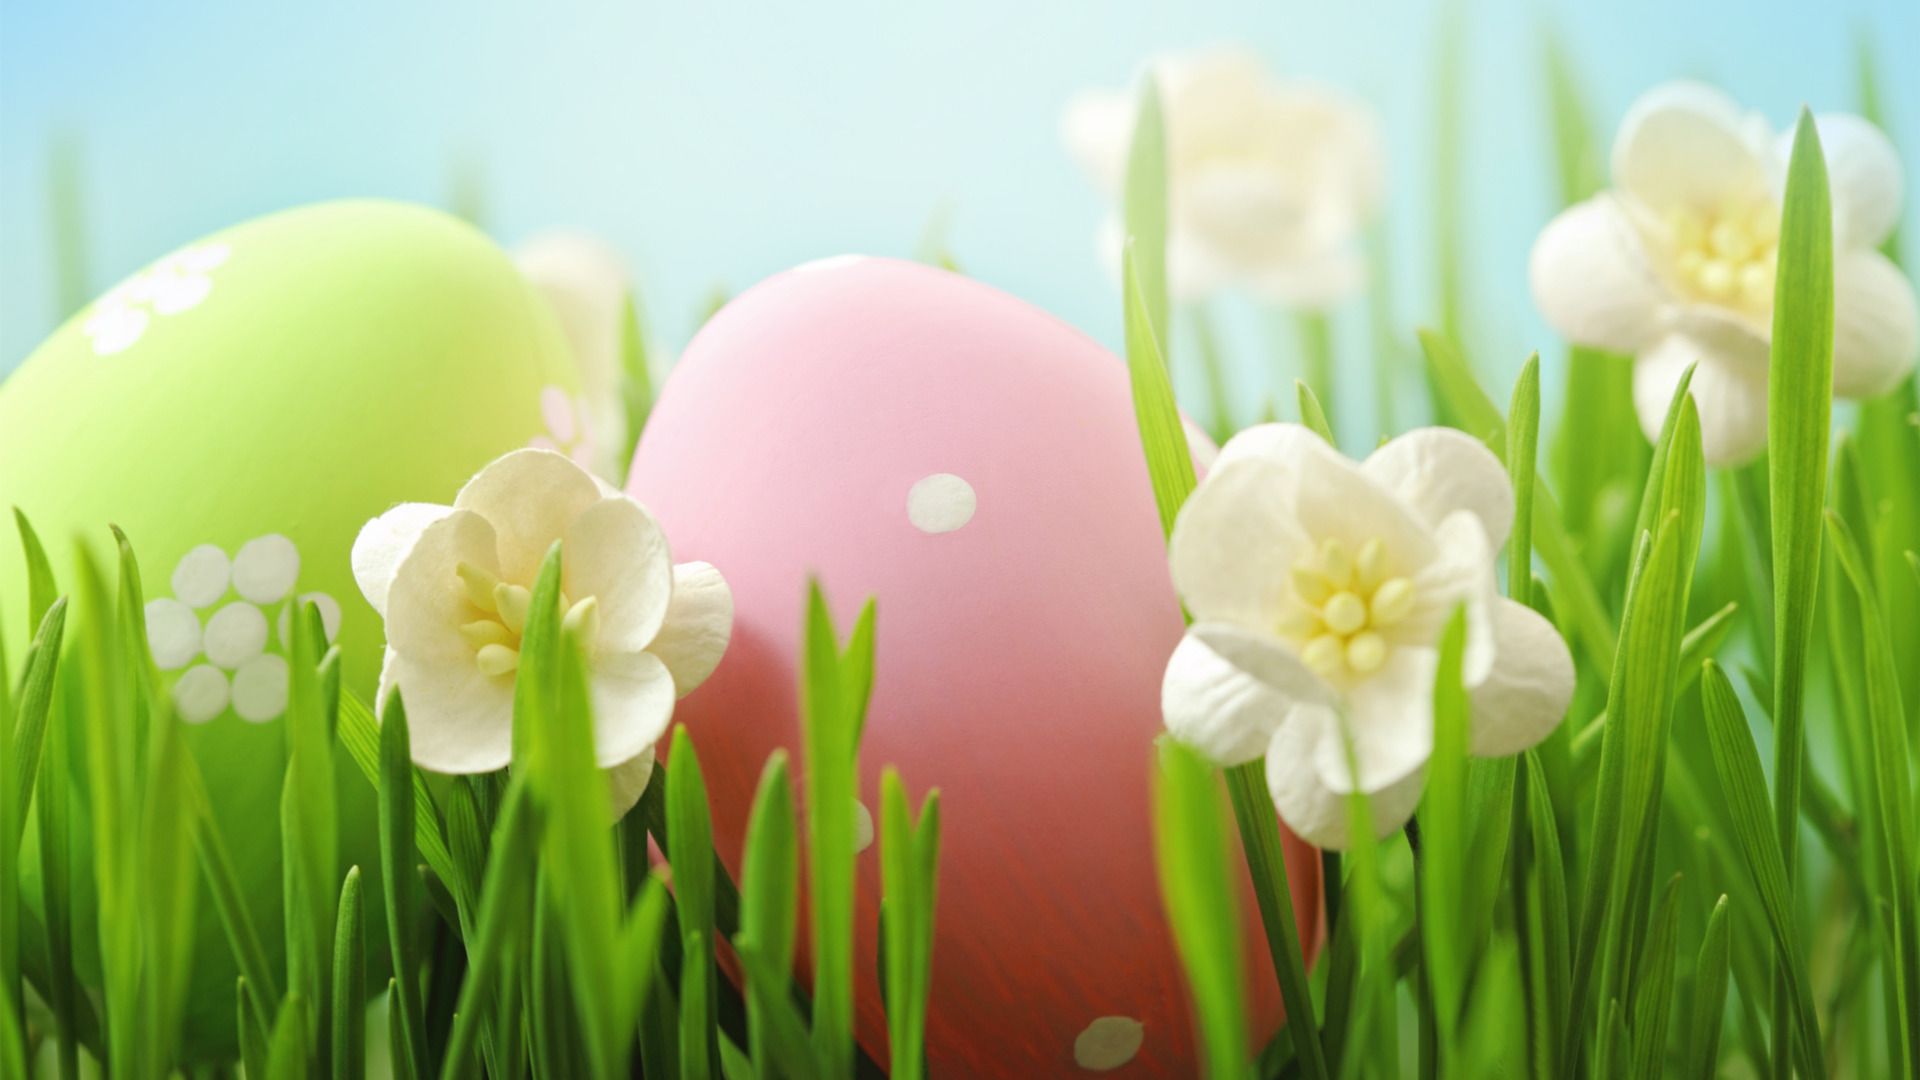 Easter 1920x1080, High Definition, High Quality, Widescreen